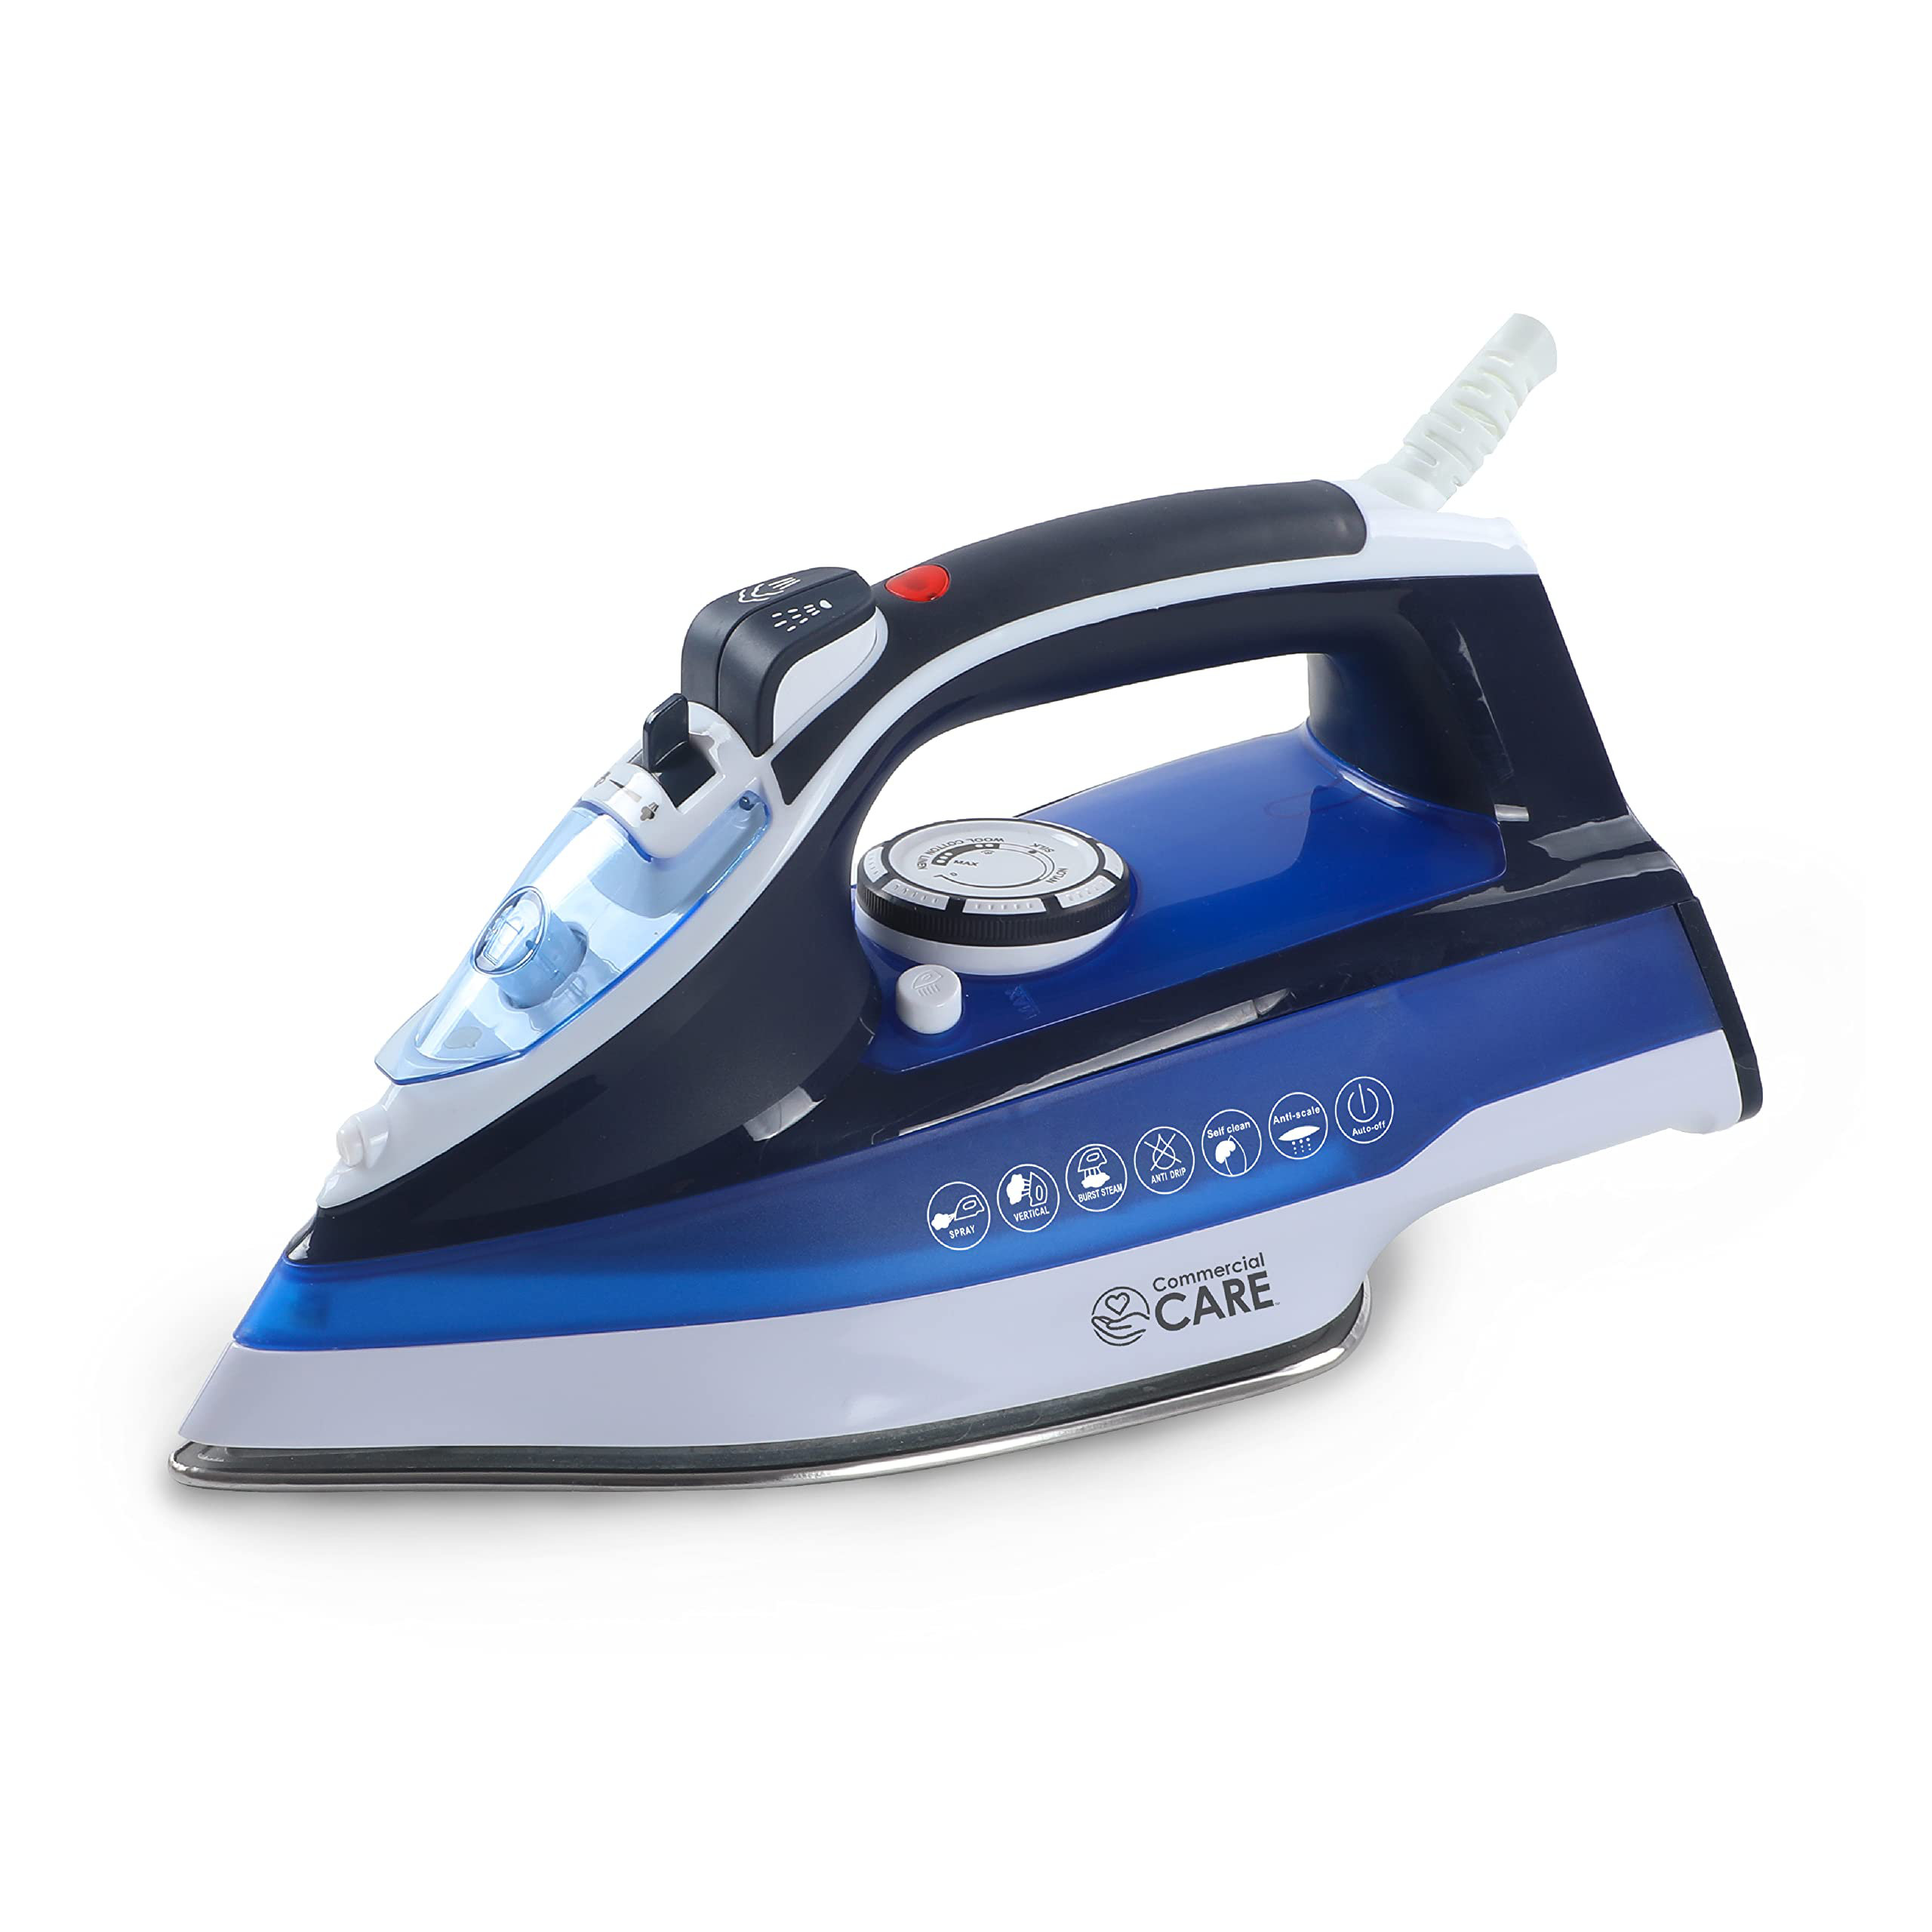 Color : Blue Handheld Electric Iron Household Small Portable Steam Iron with Variable Temperature and Steam Control Self-Cleaning Function 